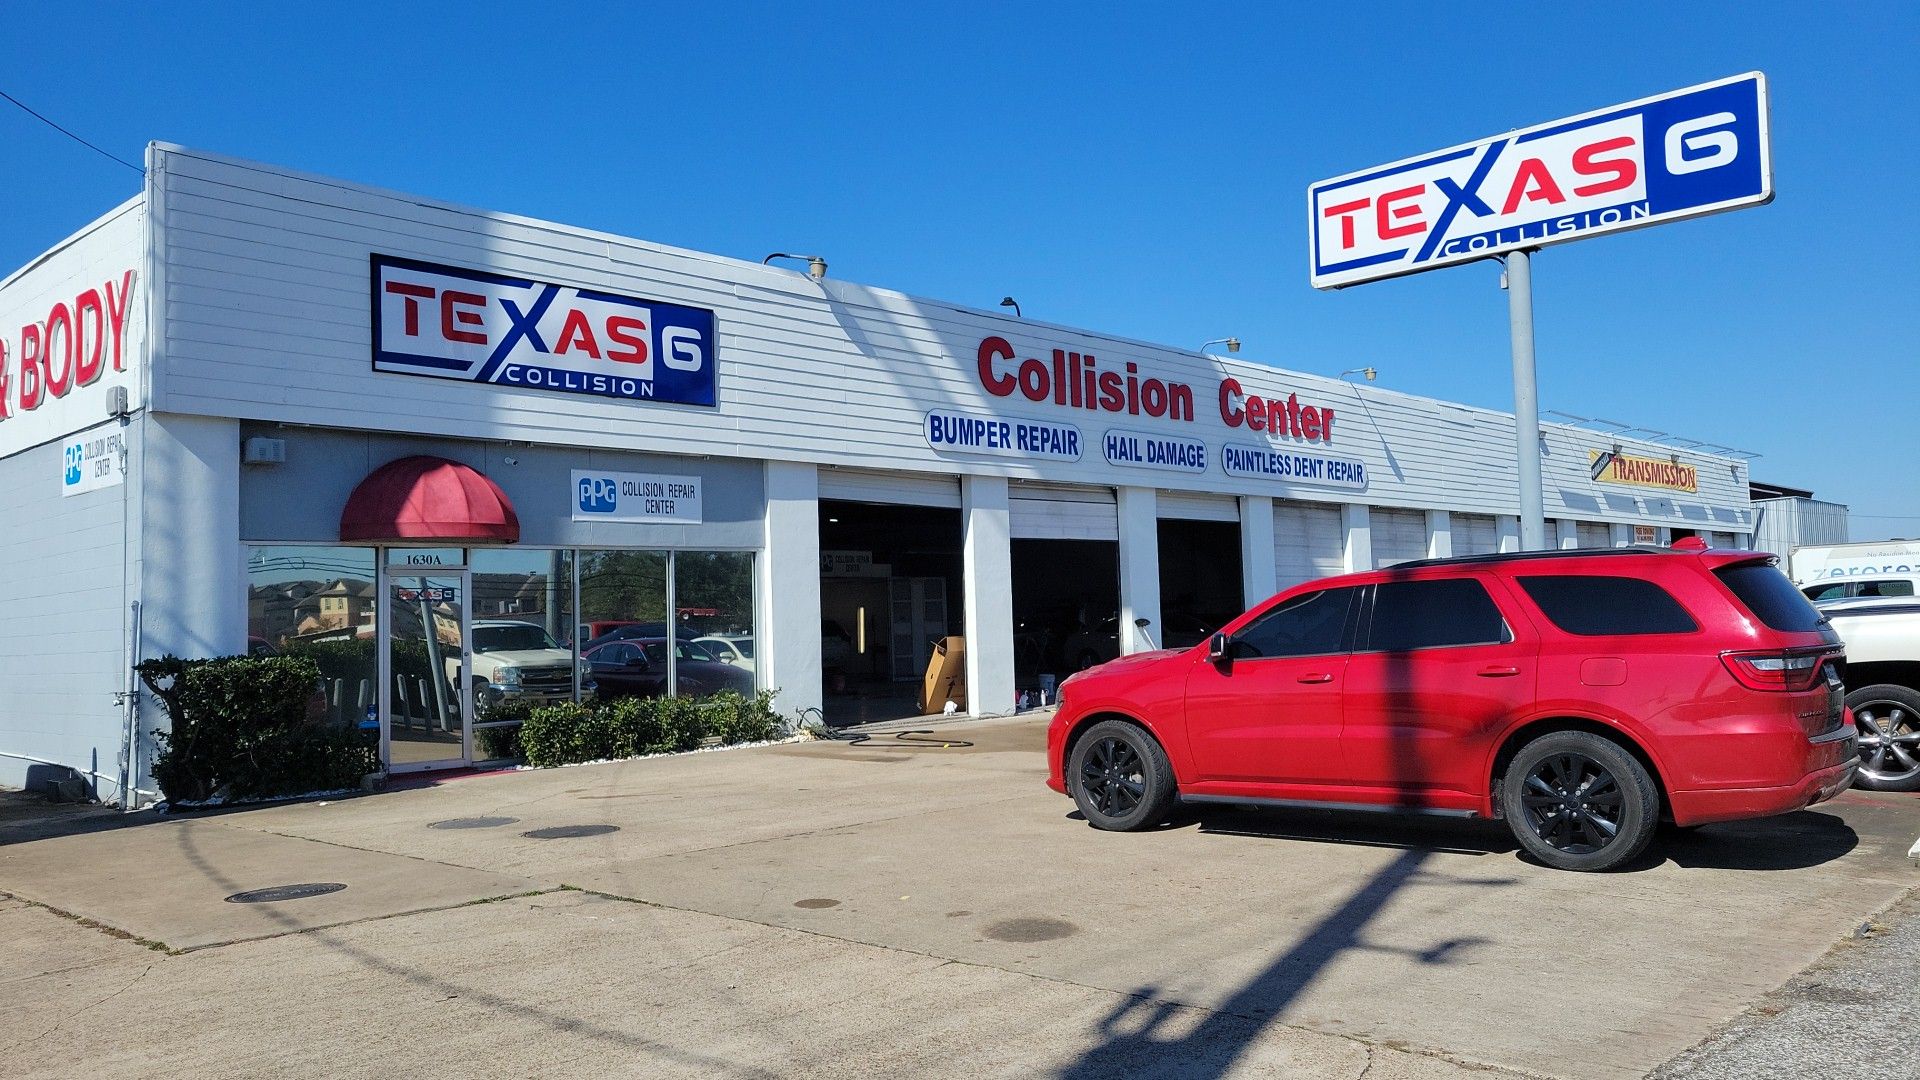 Services & Products Texas 6 Collision in Houston TX